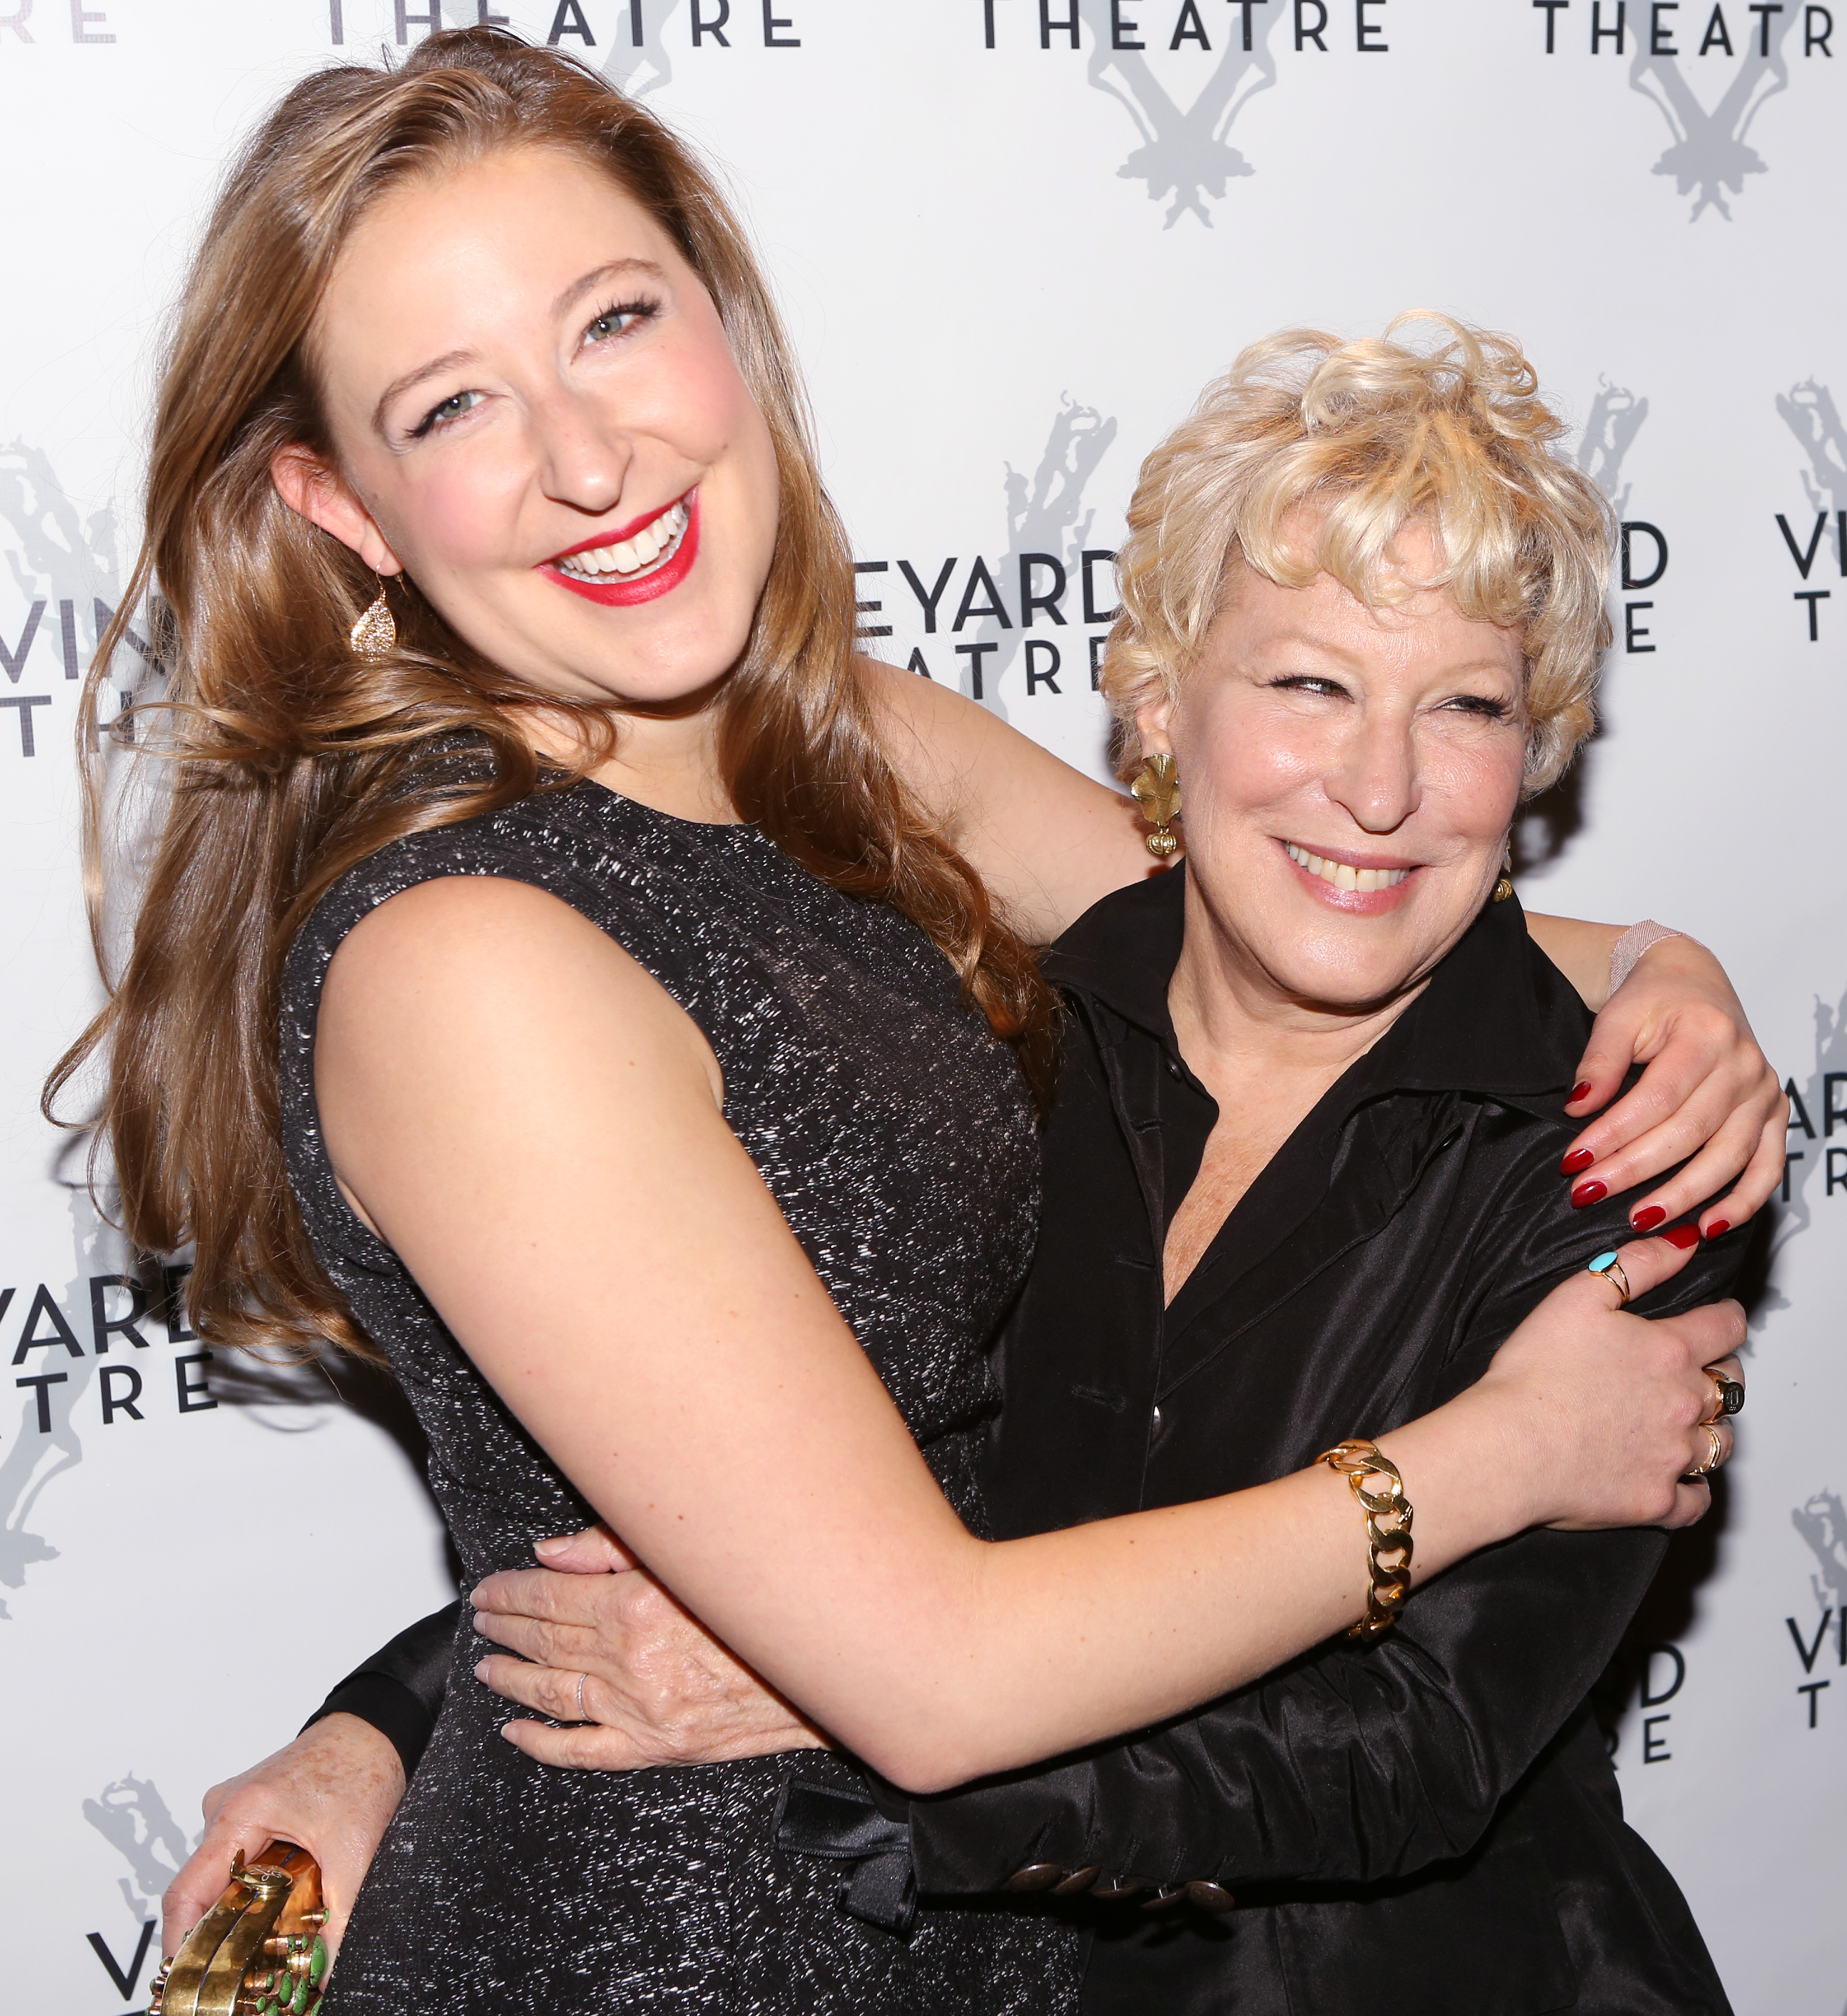 Sophie von Haselberg and Bette Midler at the Off-Broadway opening night performance after-party for "Billy & Ray" in New York City, 2014 | Source: Getty Images